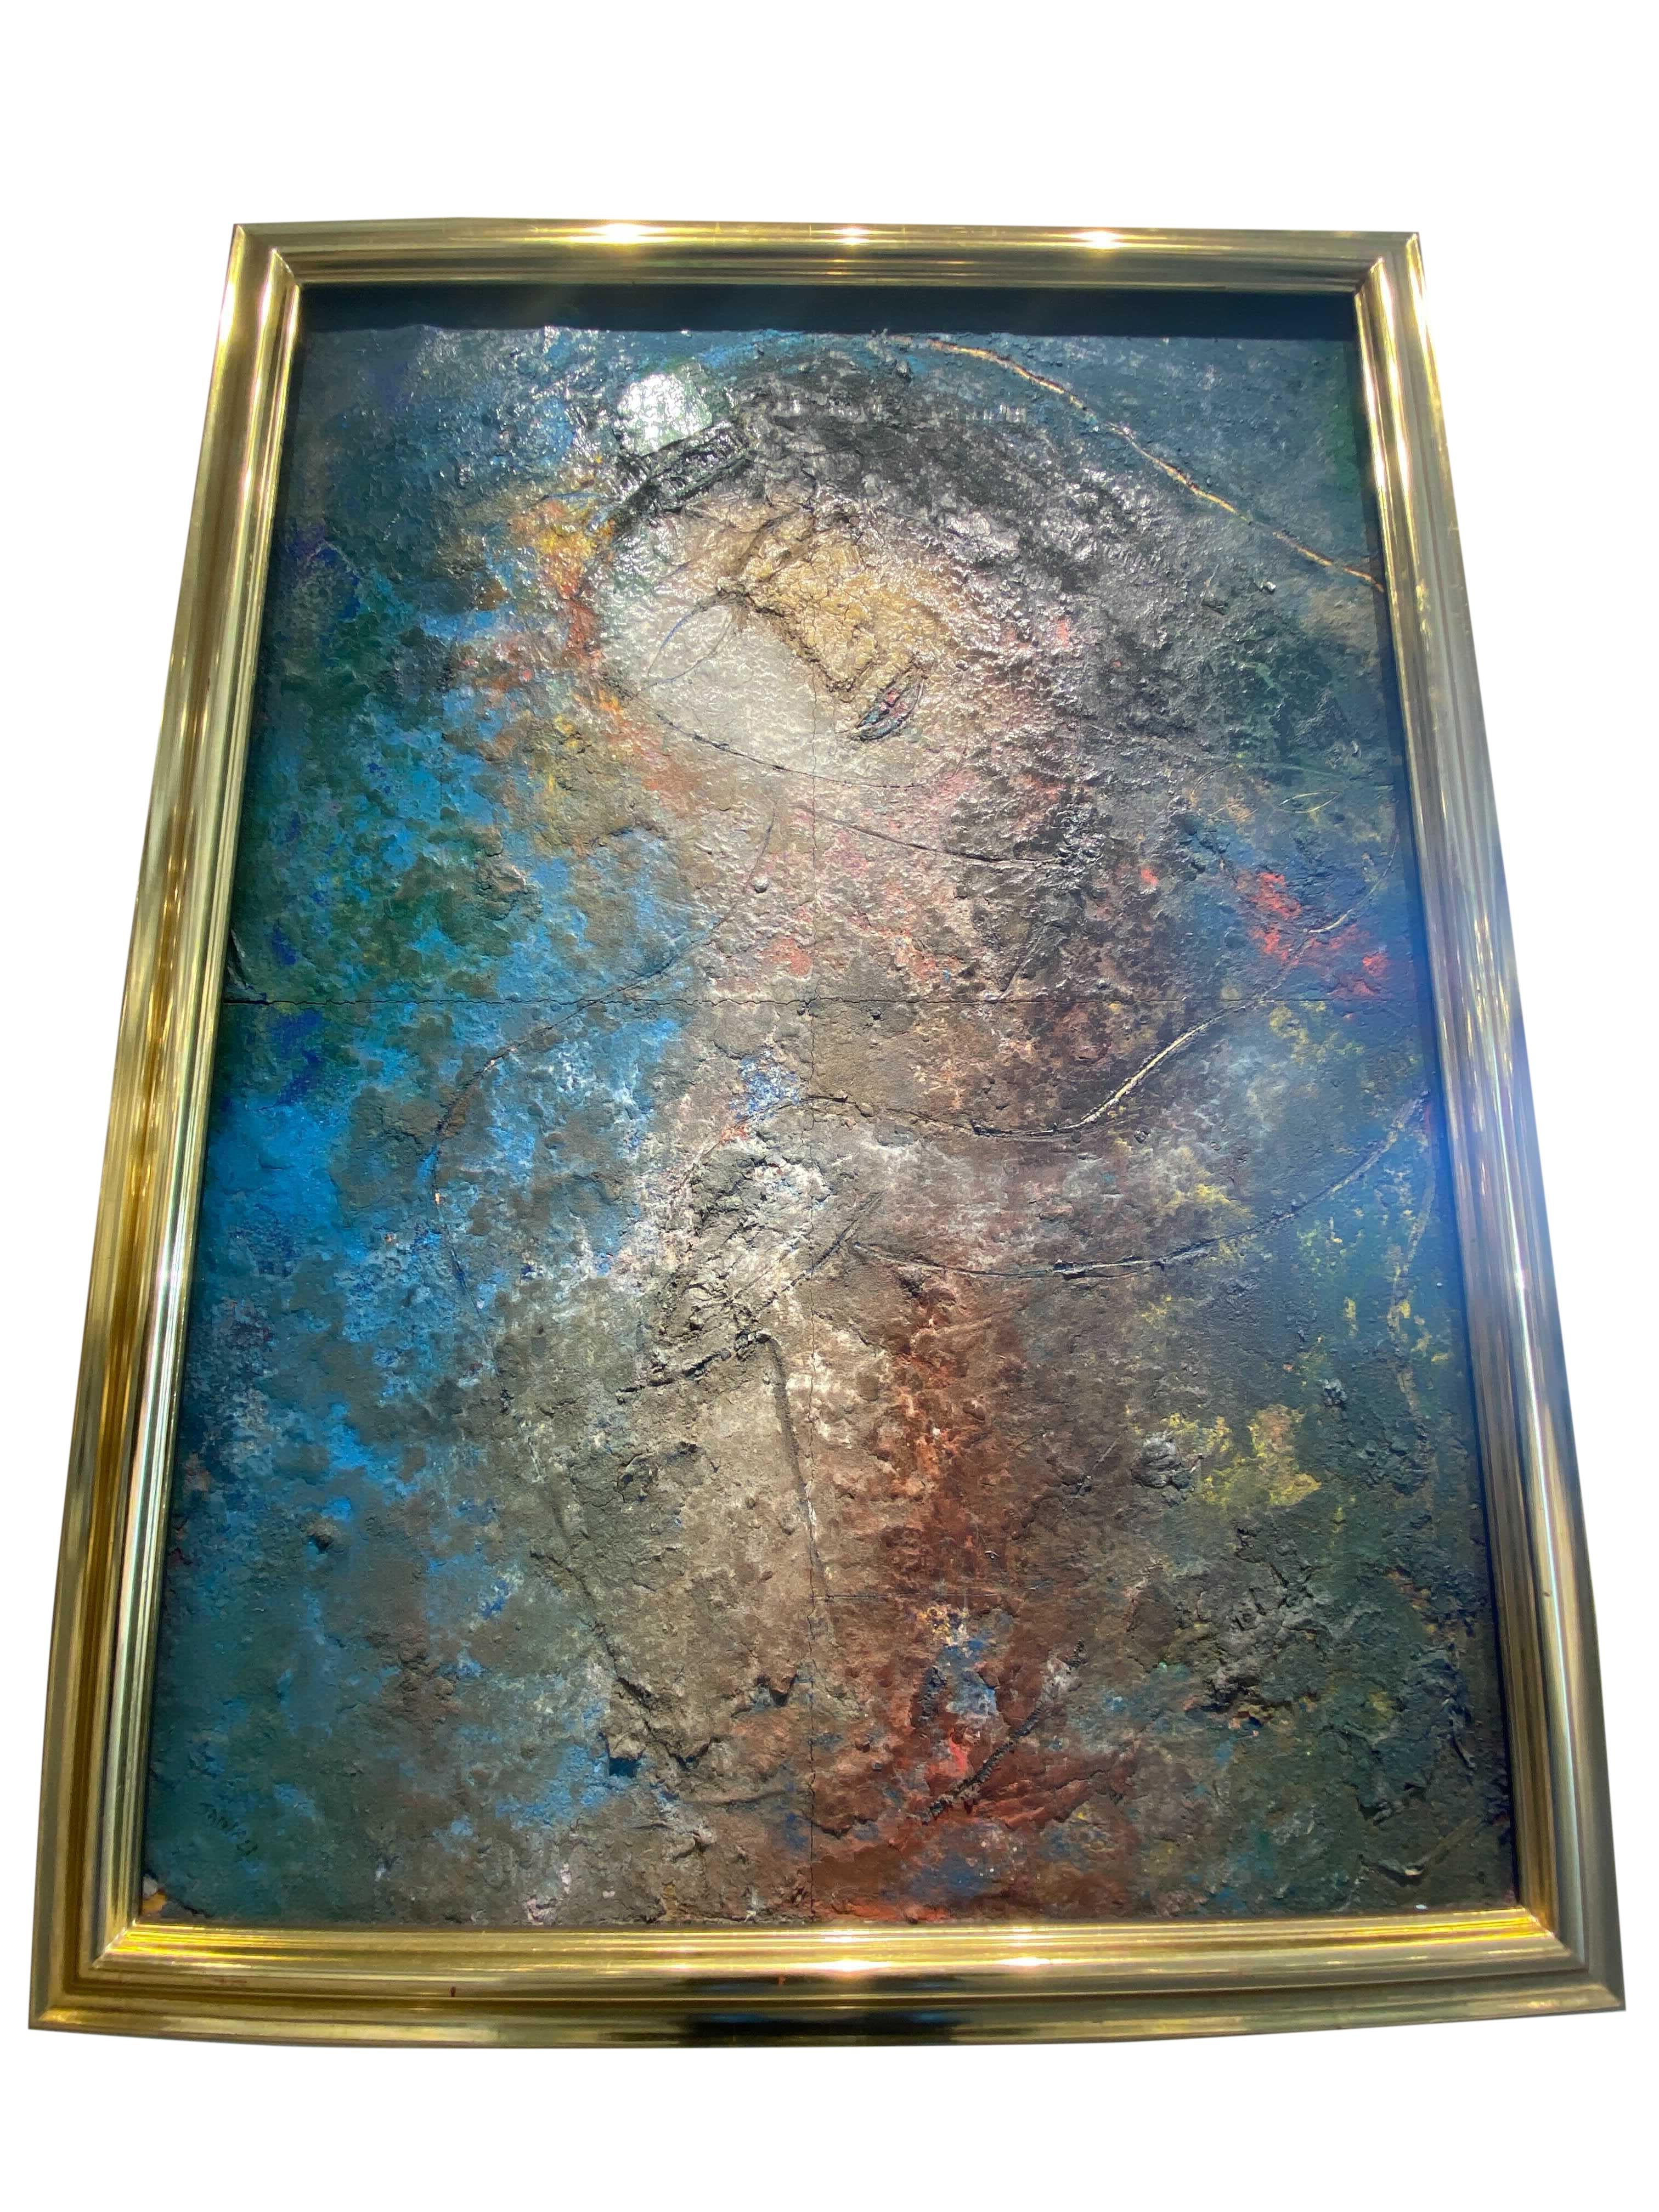 One of the early creations of avant-garde artist Jamali who popularized the 'Mystical Expressionism' style of painting.
It is in an open frame (no glass) which has a dimension of 43 in x 57 in. This piece is currently displayed in a fine rug